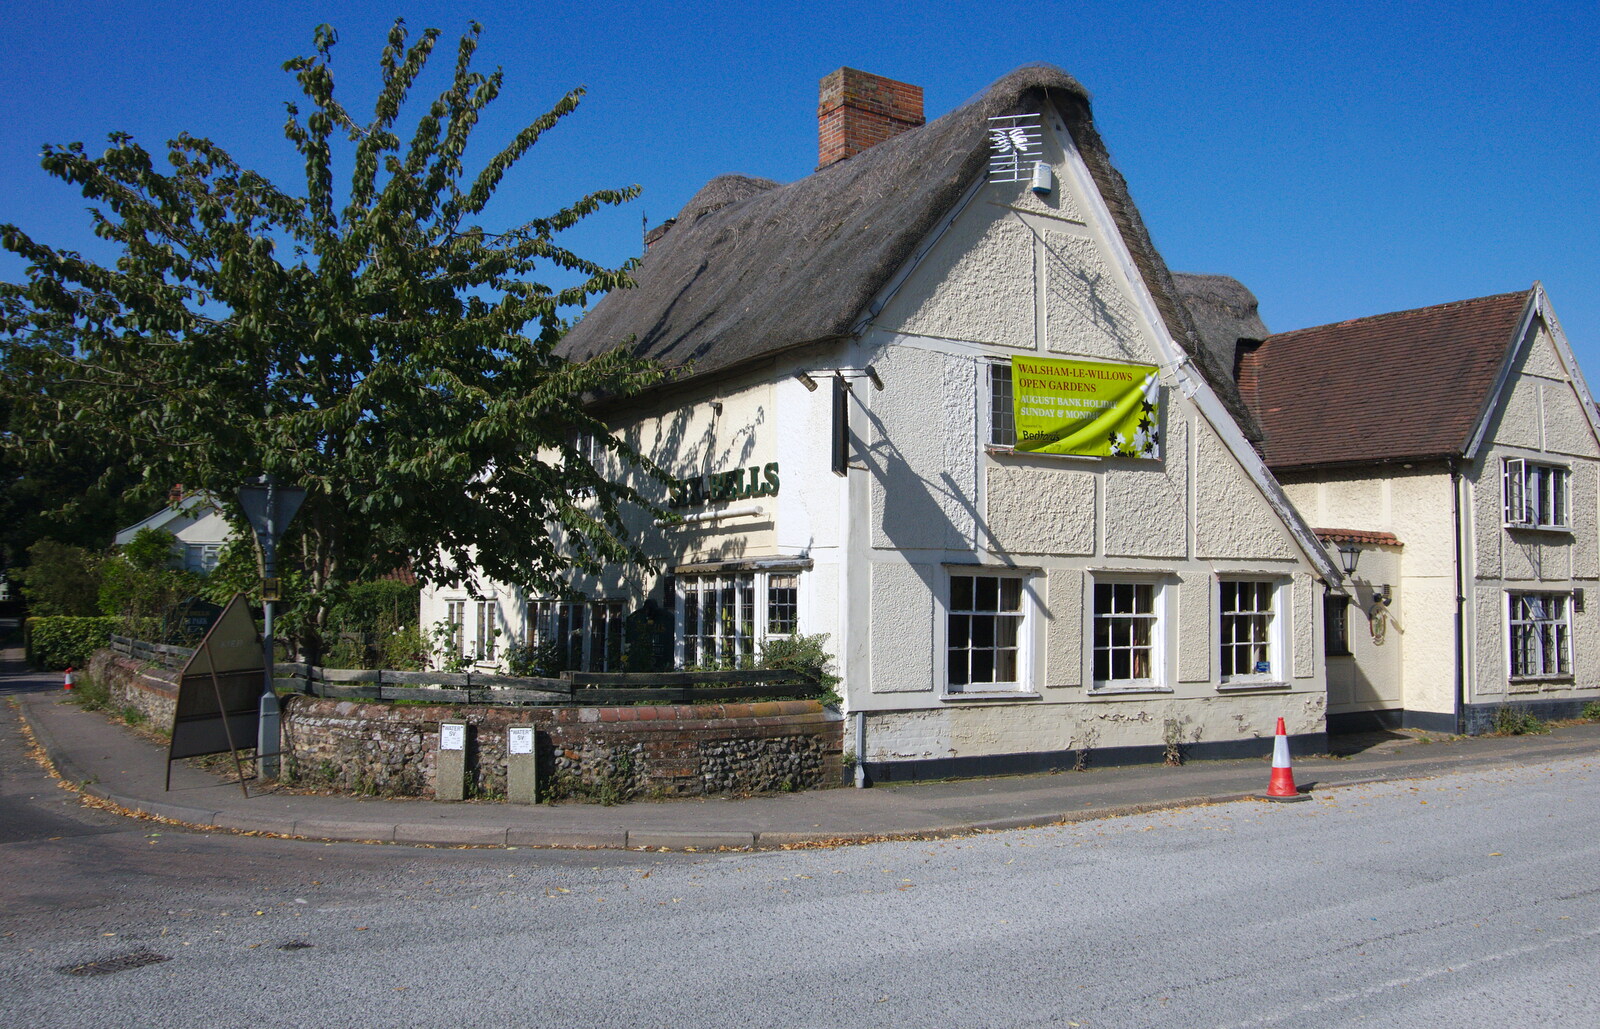 The Six Bells pub, which might be closed from The Gislingham Silver Band at Walsham Le Willows, Suffolk - 26th August 2019